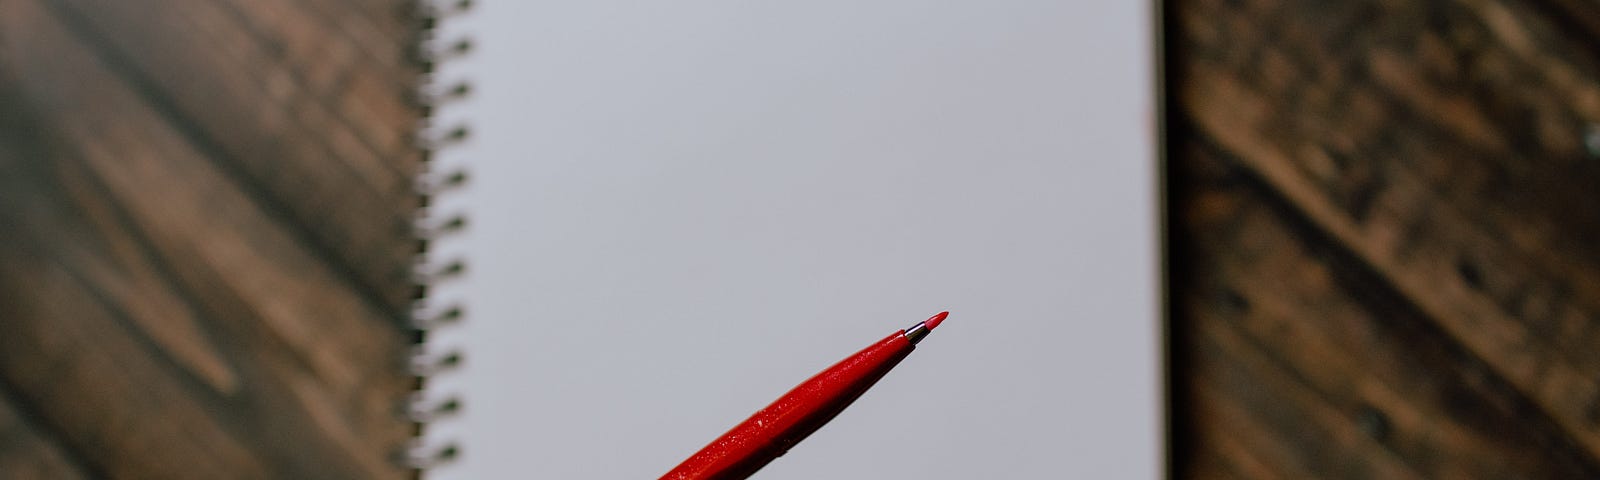 A left hand holds a red pen poised over a notebook on a wooden desk.